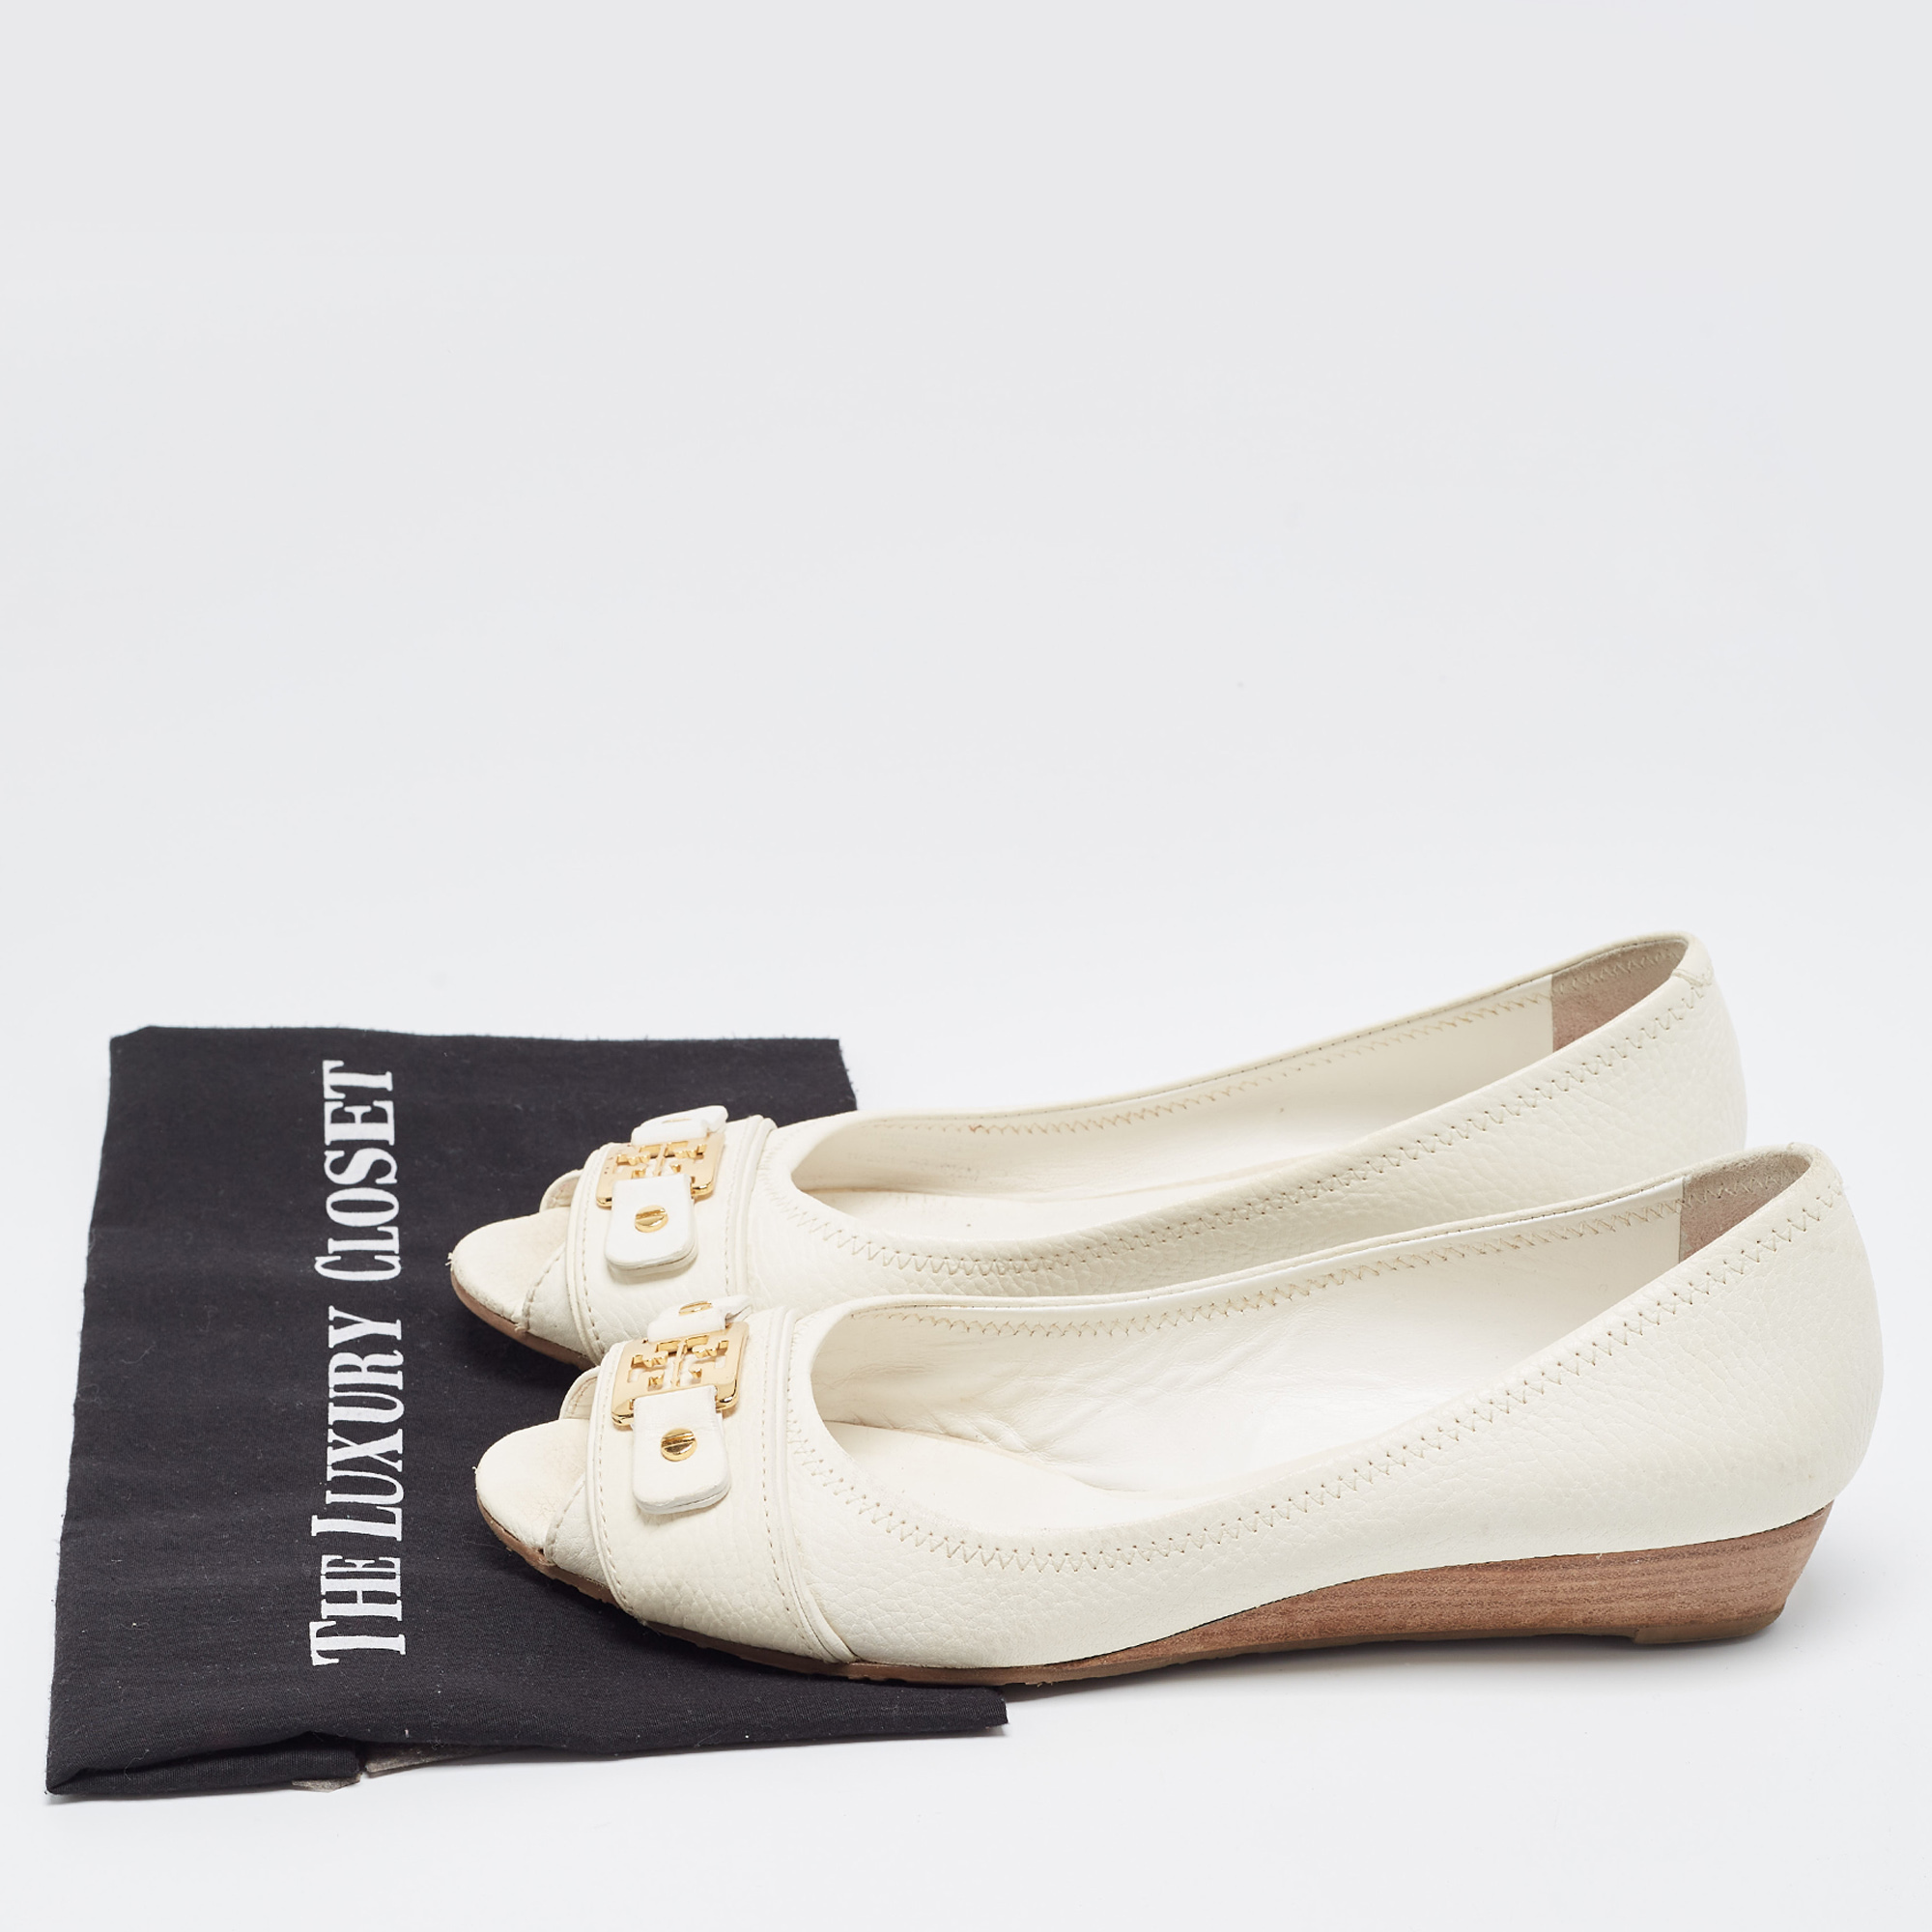 Tory Burch White Leather Logo Detail Peep Toe Wedge Pumps Size 40